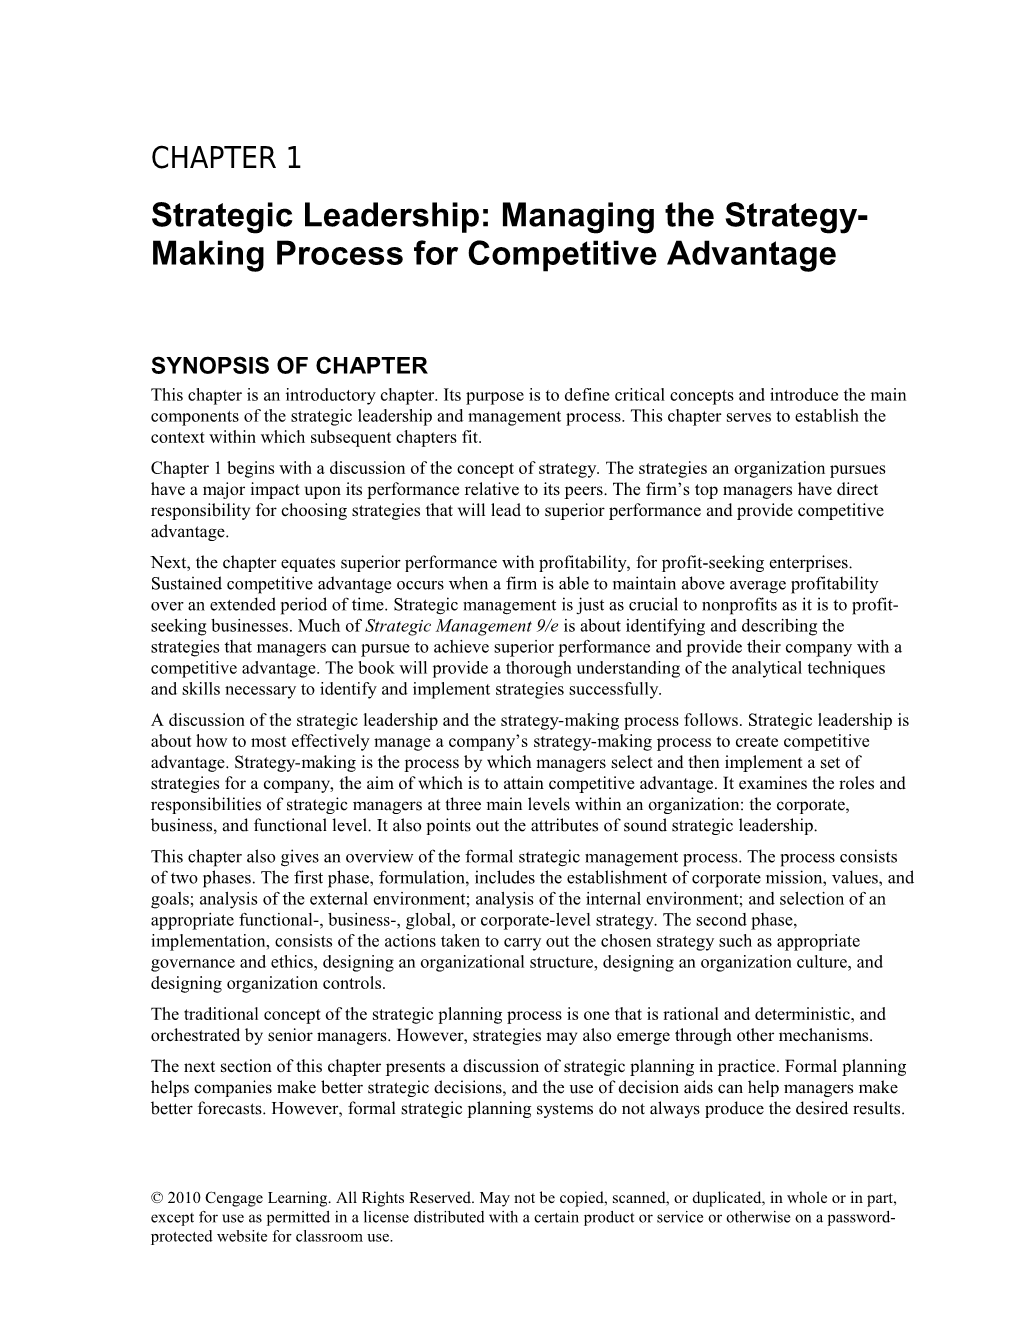 Strategic Leadership: Managing the Strategy-Making Process for Competitive Advantage